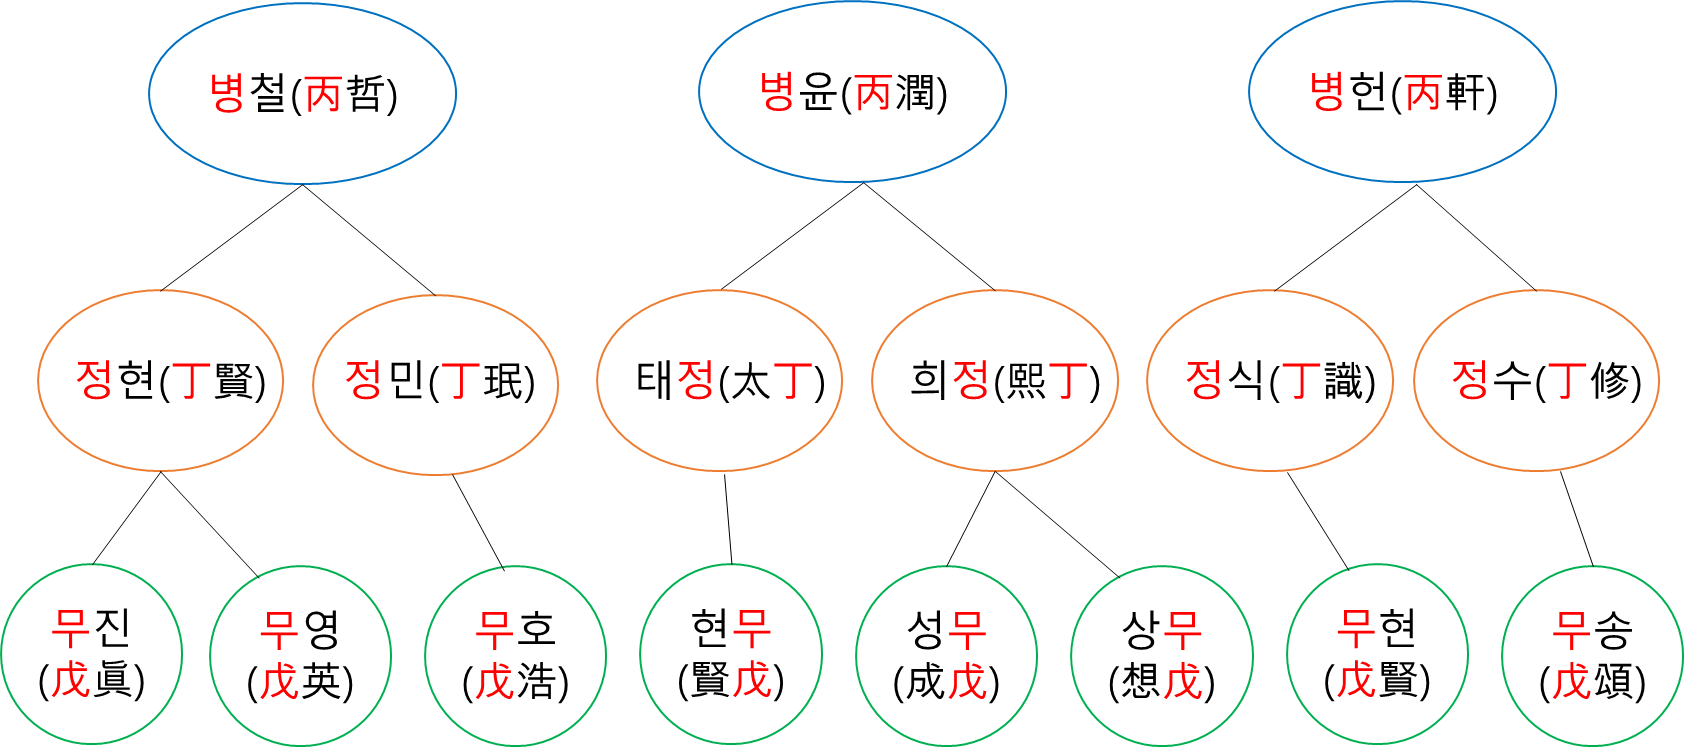 diagram showing an example of the Hangnyeol tradition for Korean male names